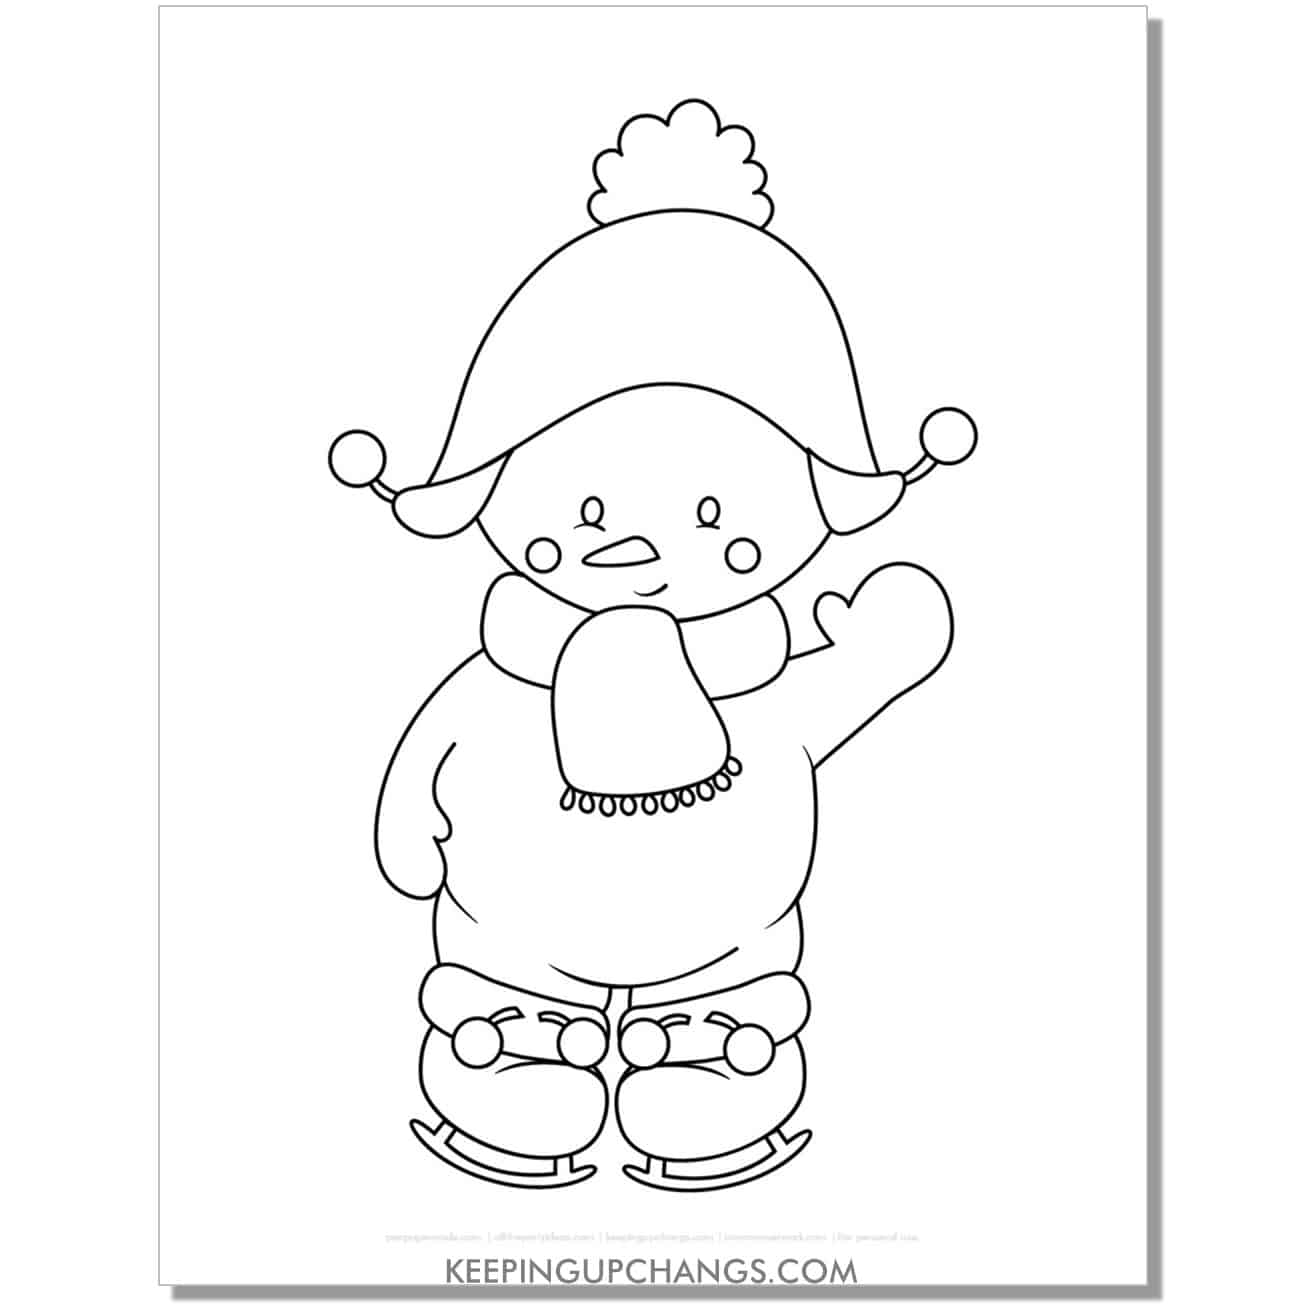 free ice skating snowman coloring page.